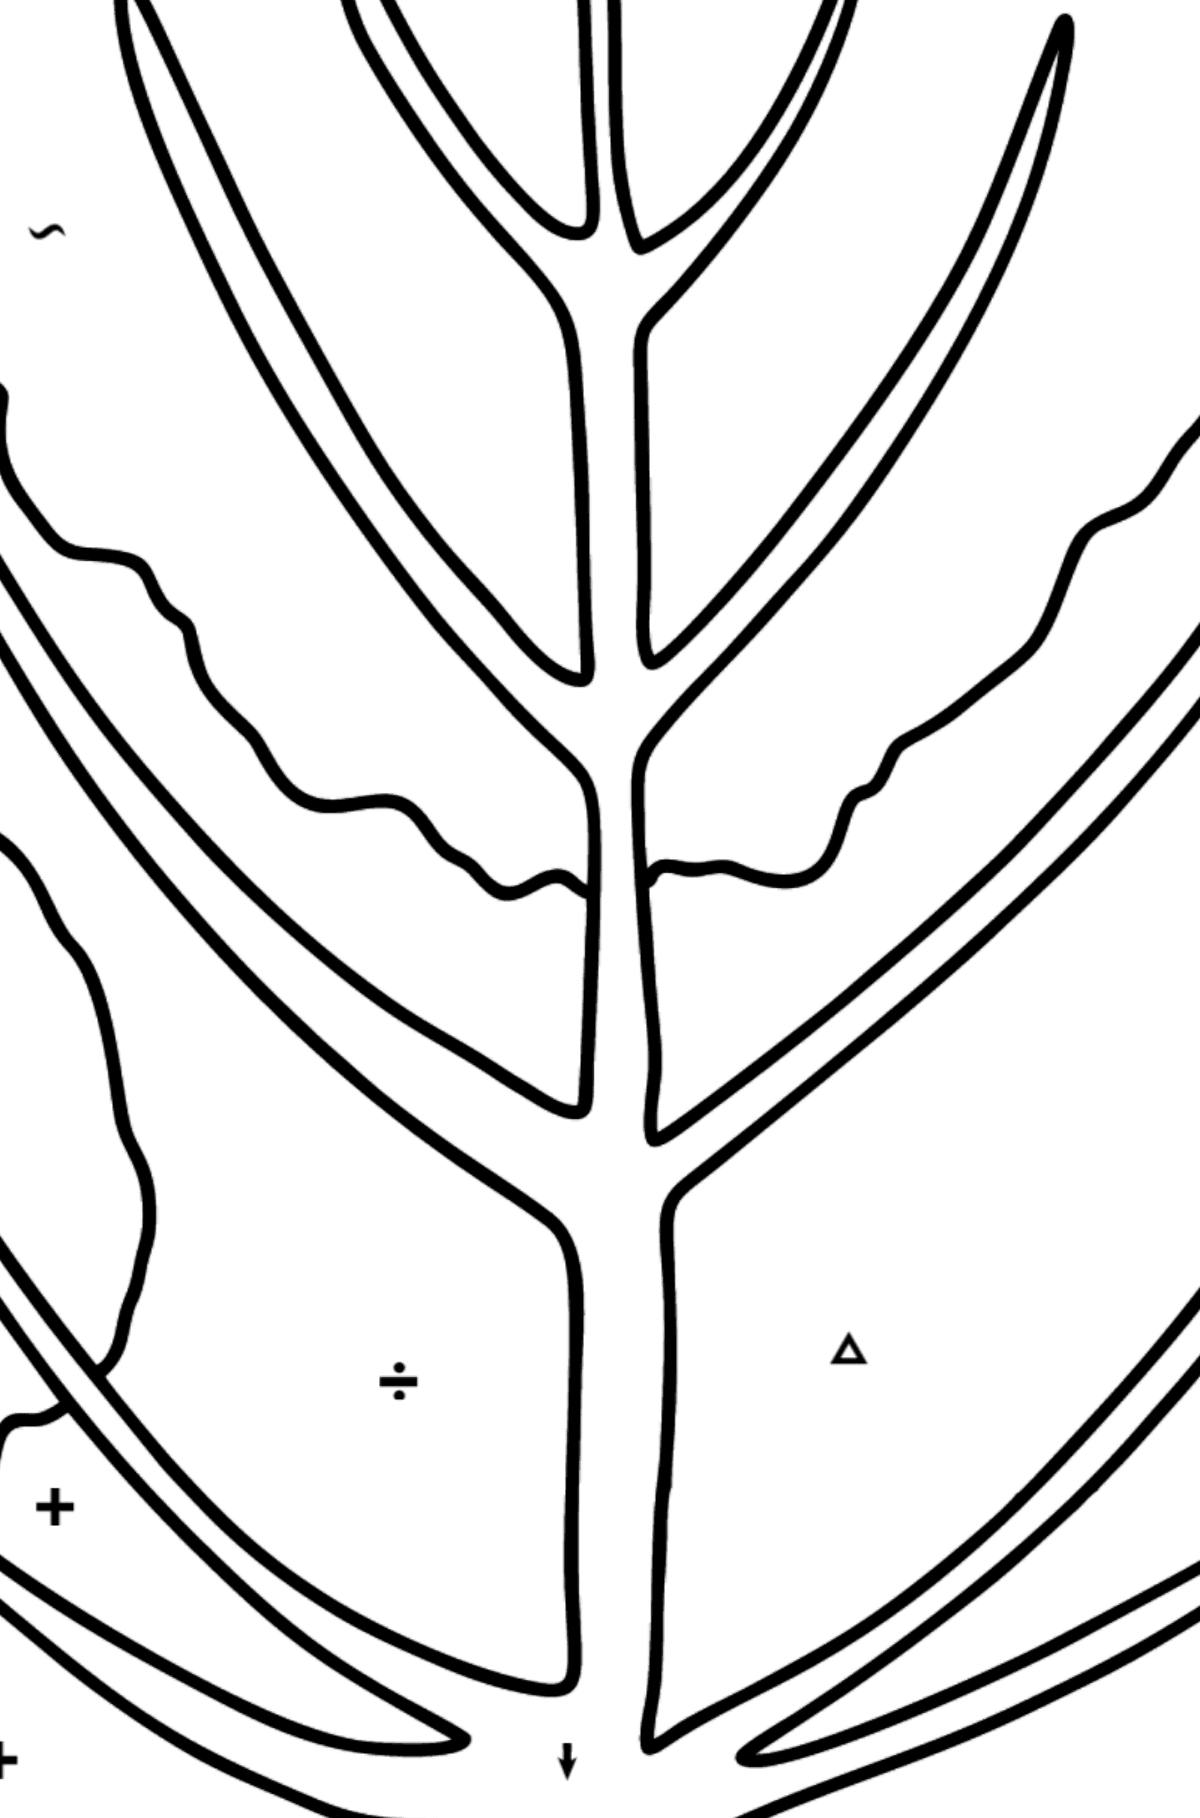 Aspen Leaf coloring page - Coloring by Symbols for Kids